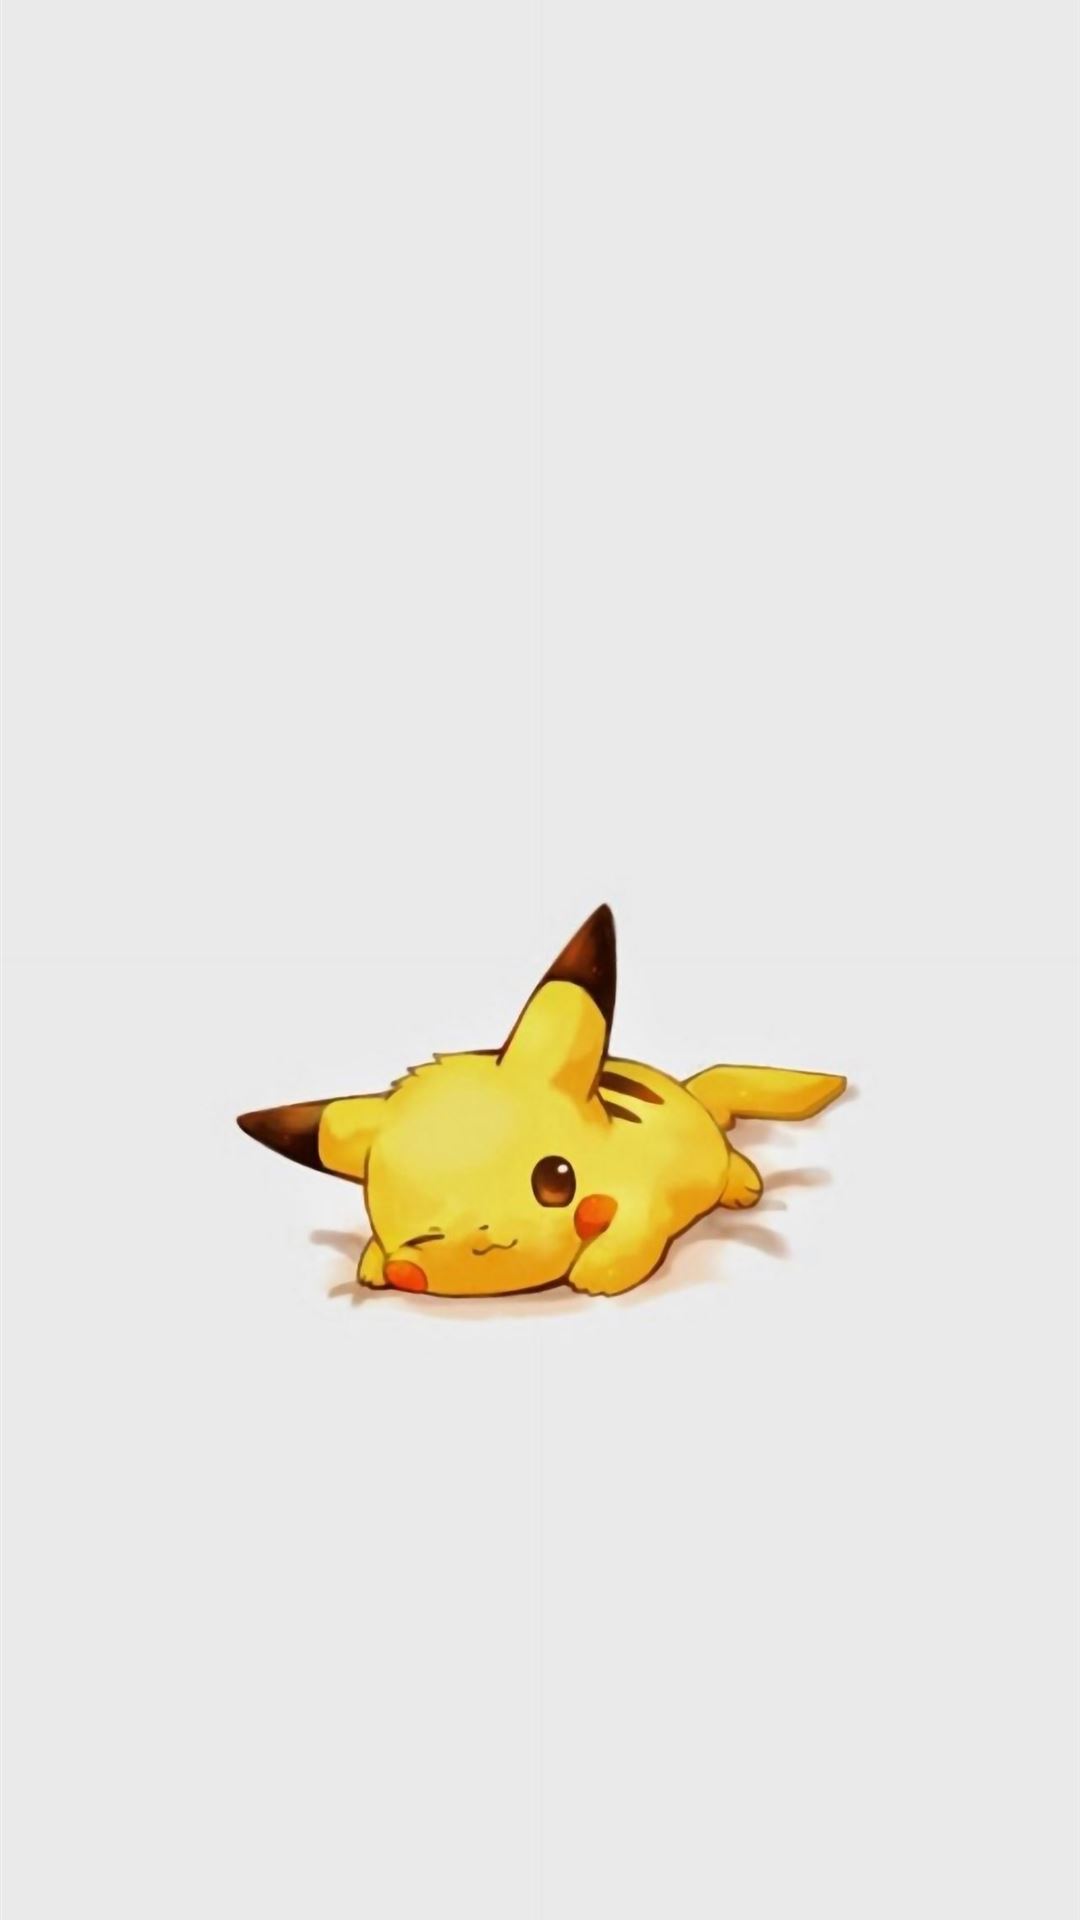 Cute Pikachu Pokemon Character iPhone Wallpapers Free Download